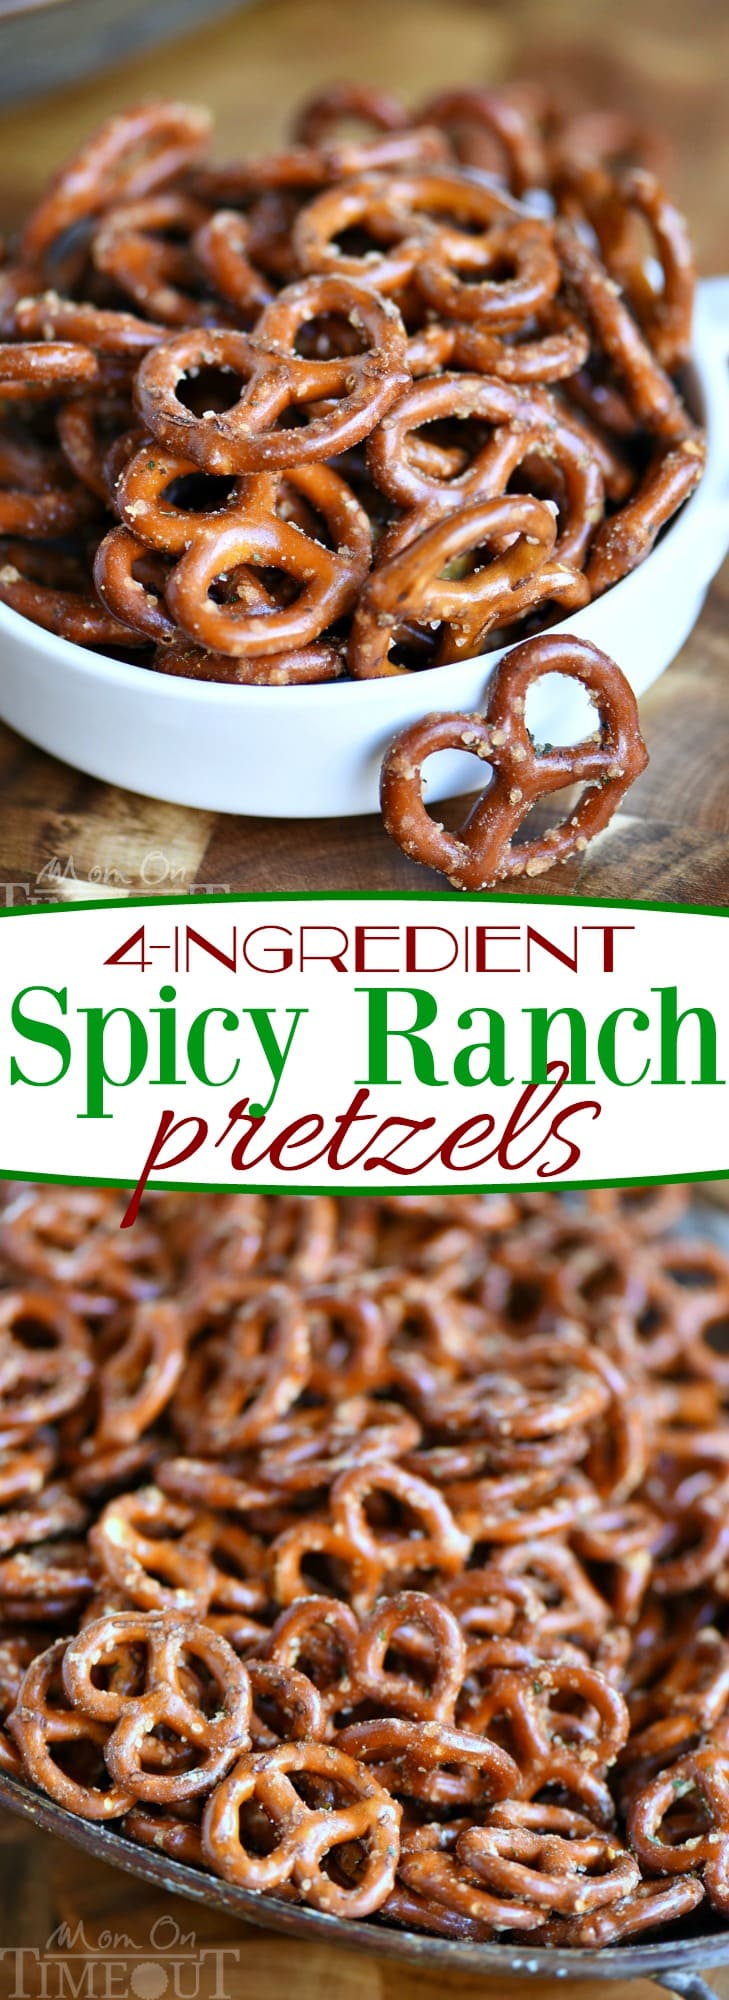 These Spicy Ranch Pretzels are totally addicting and use only 4 ingredients! This delightfully easy recipe is sure to become a new family favorite! Perfect for game day! // Mom On Timeout